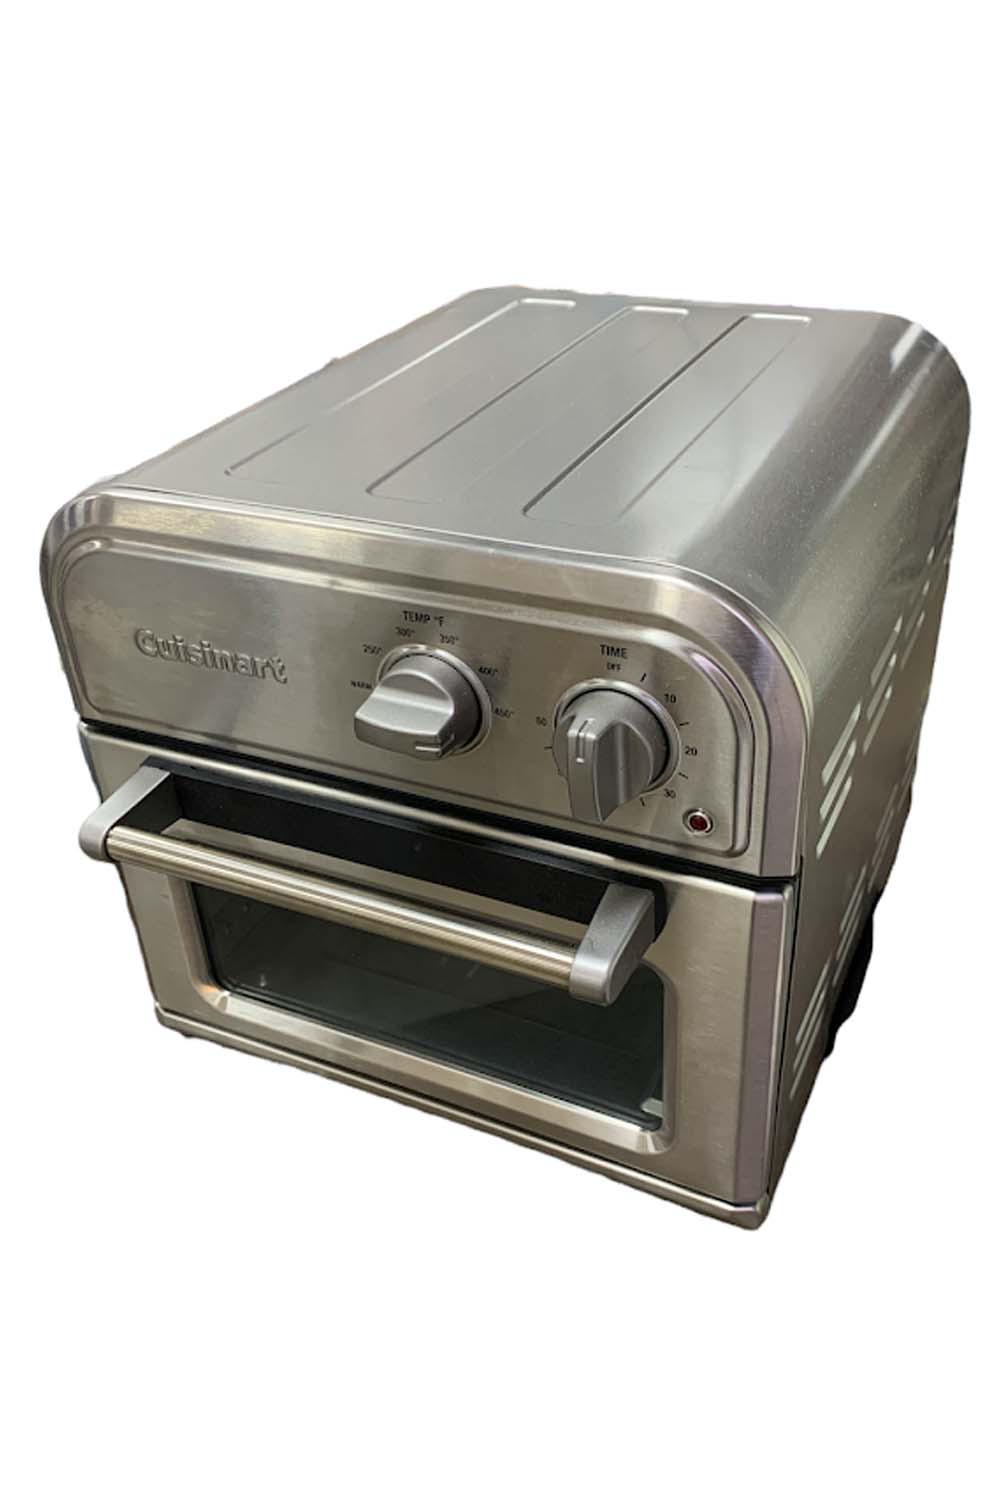 Cuisinart Compact Airfryer Toaster Oven